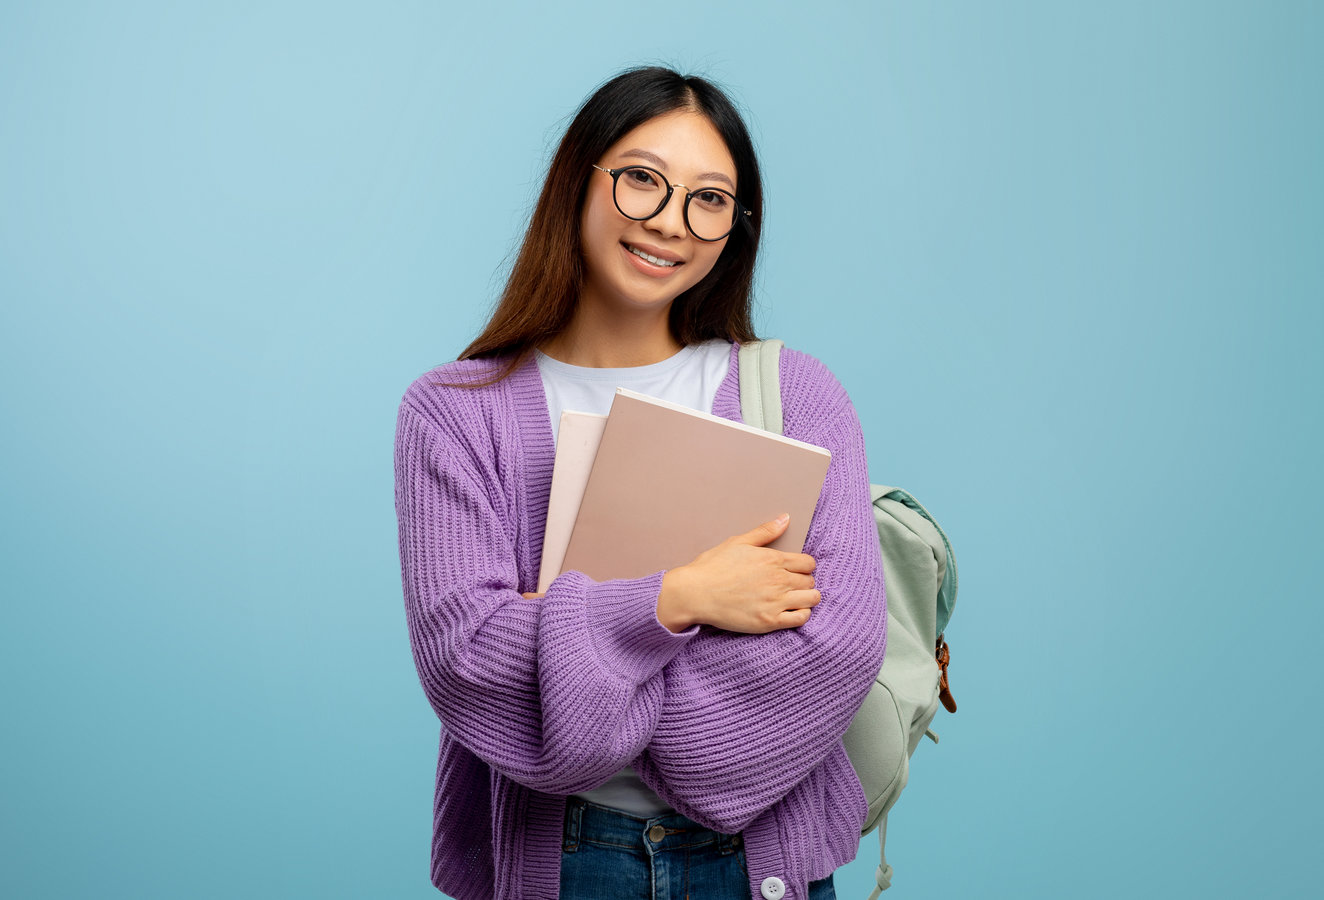 Student holding books and a backpack